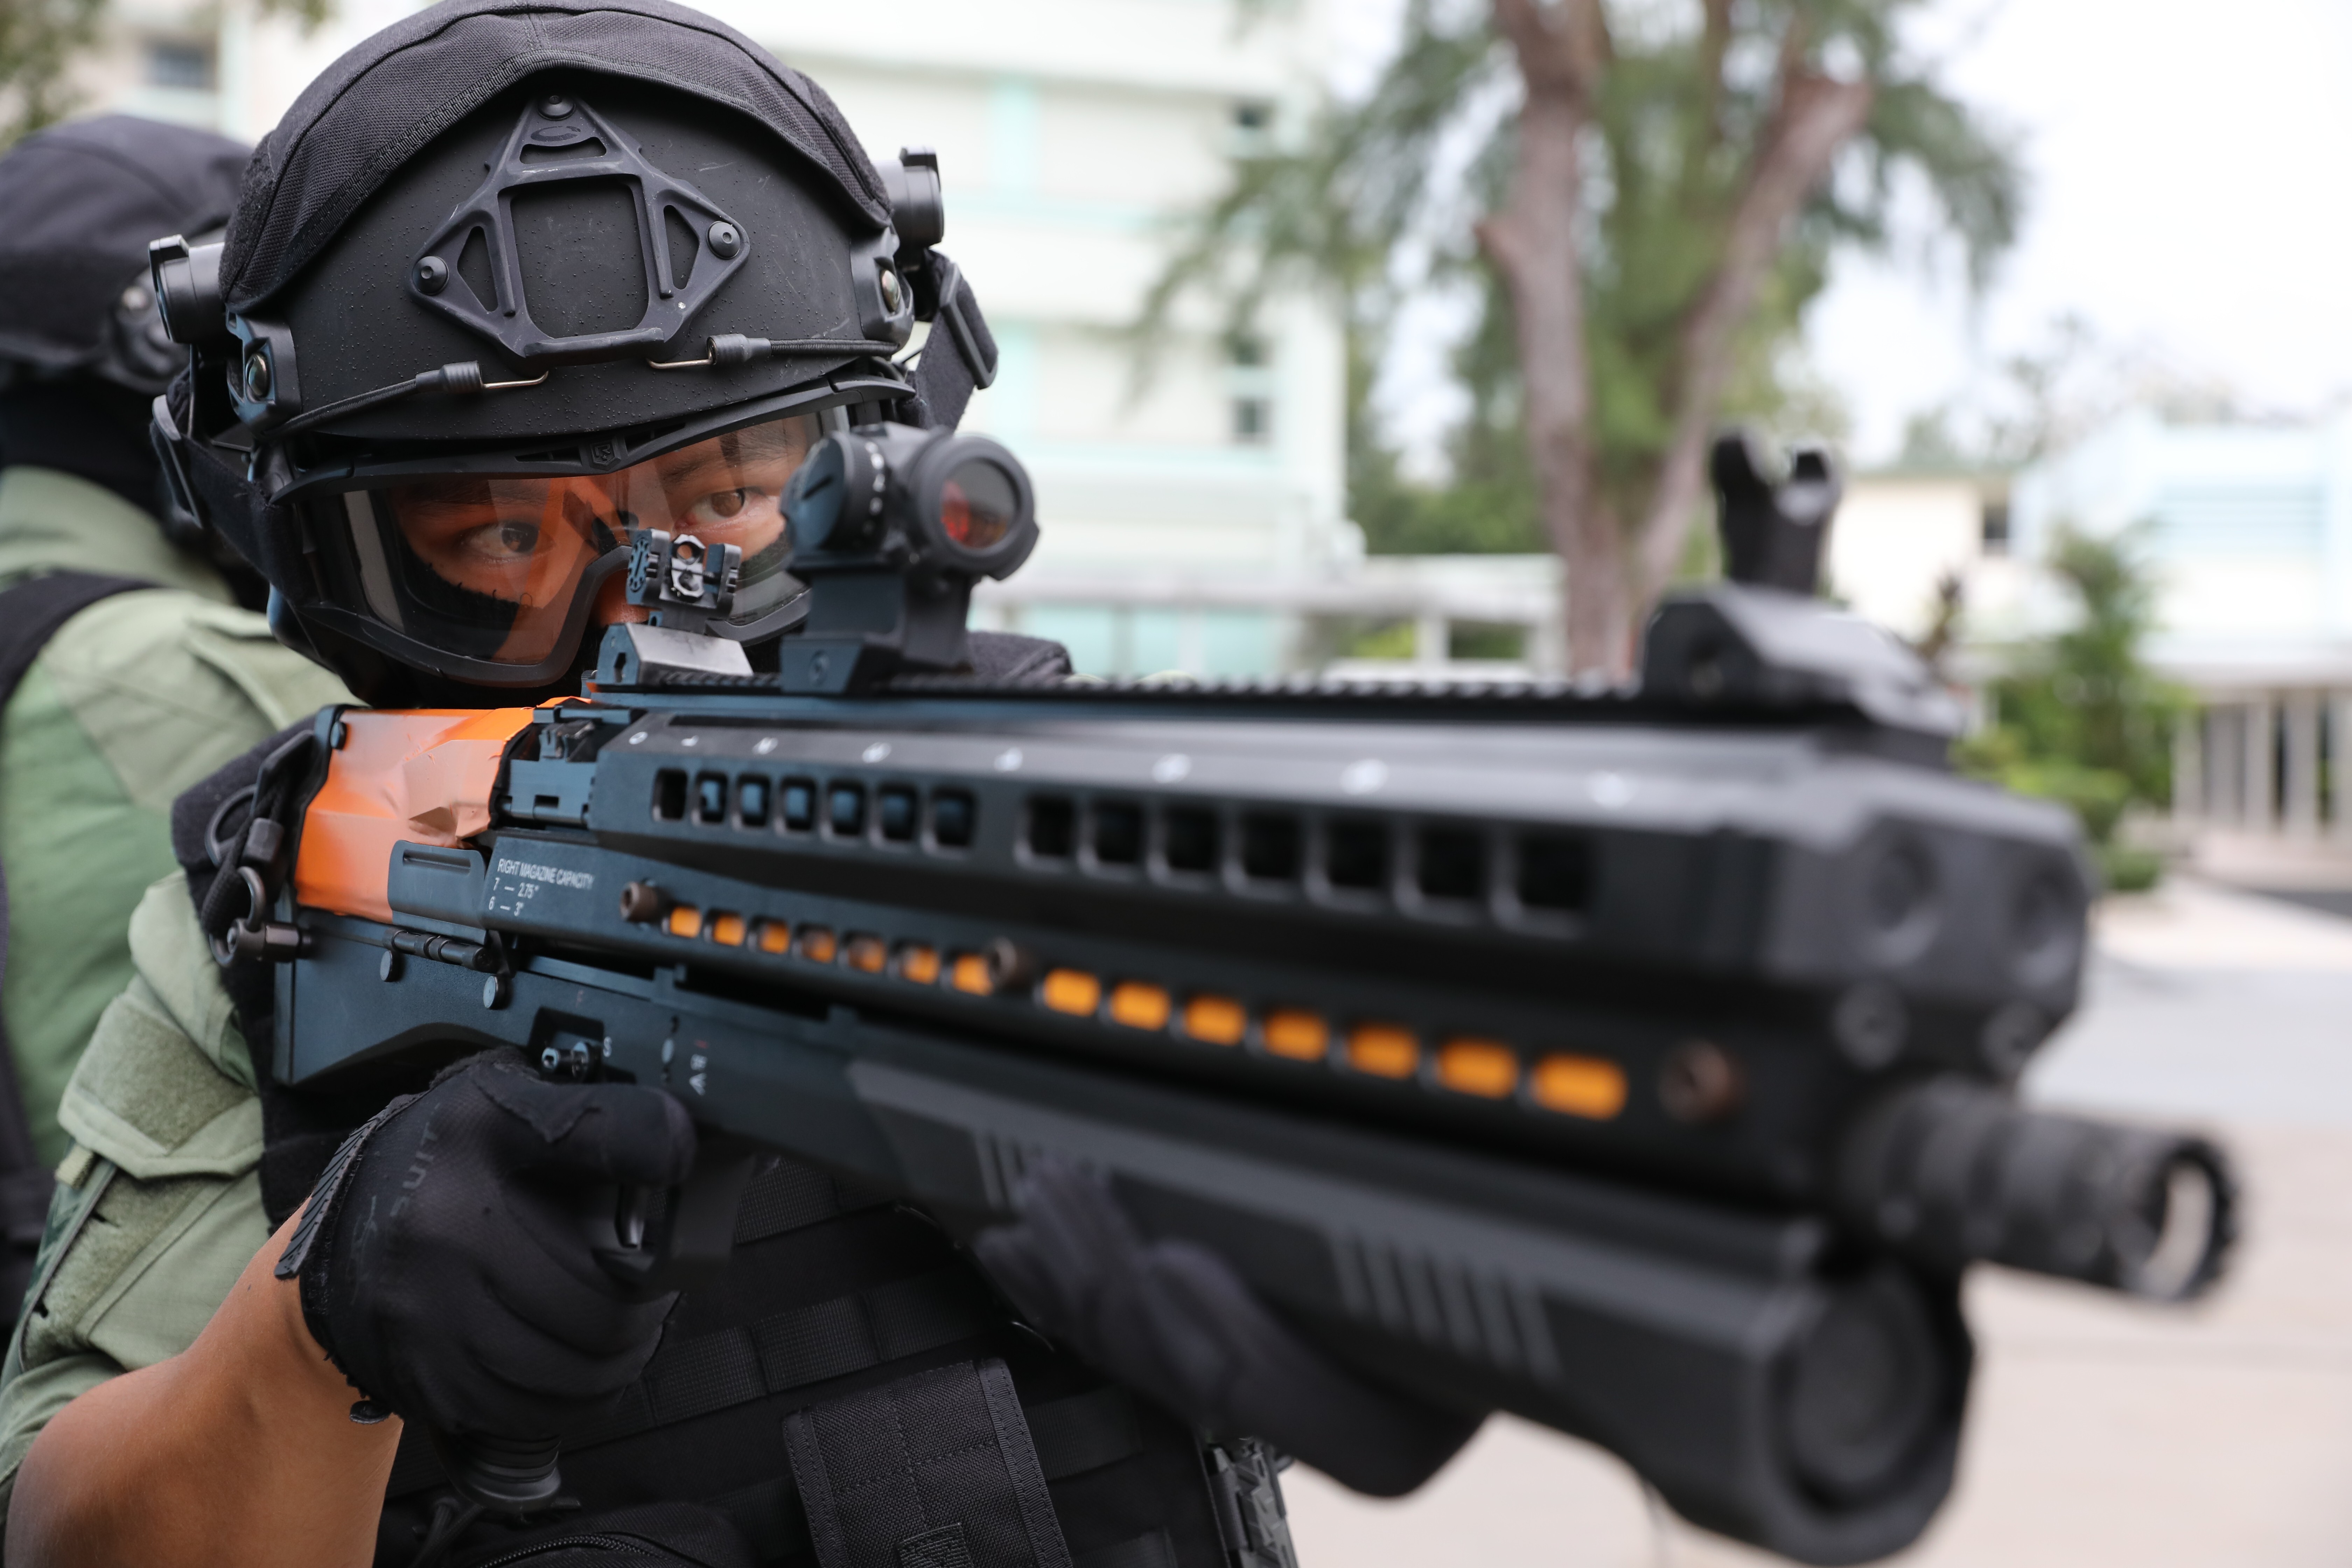 The upgraded tactical shotgun can fire beanbag rounds or rubber bullets. It has triple the loading capacity of the traditional model. Photo: Nora Tam